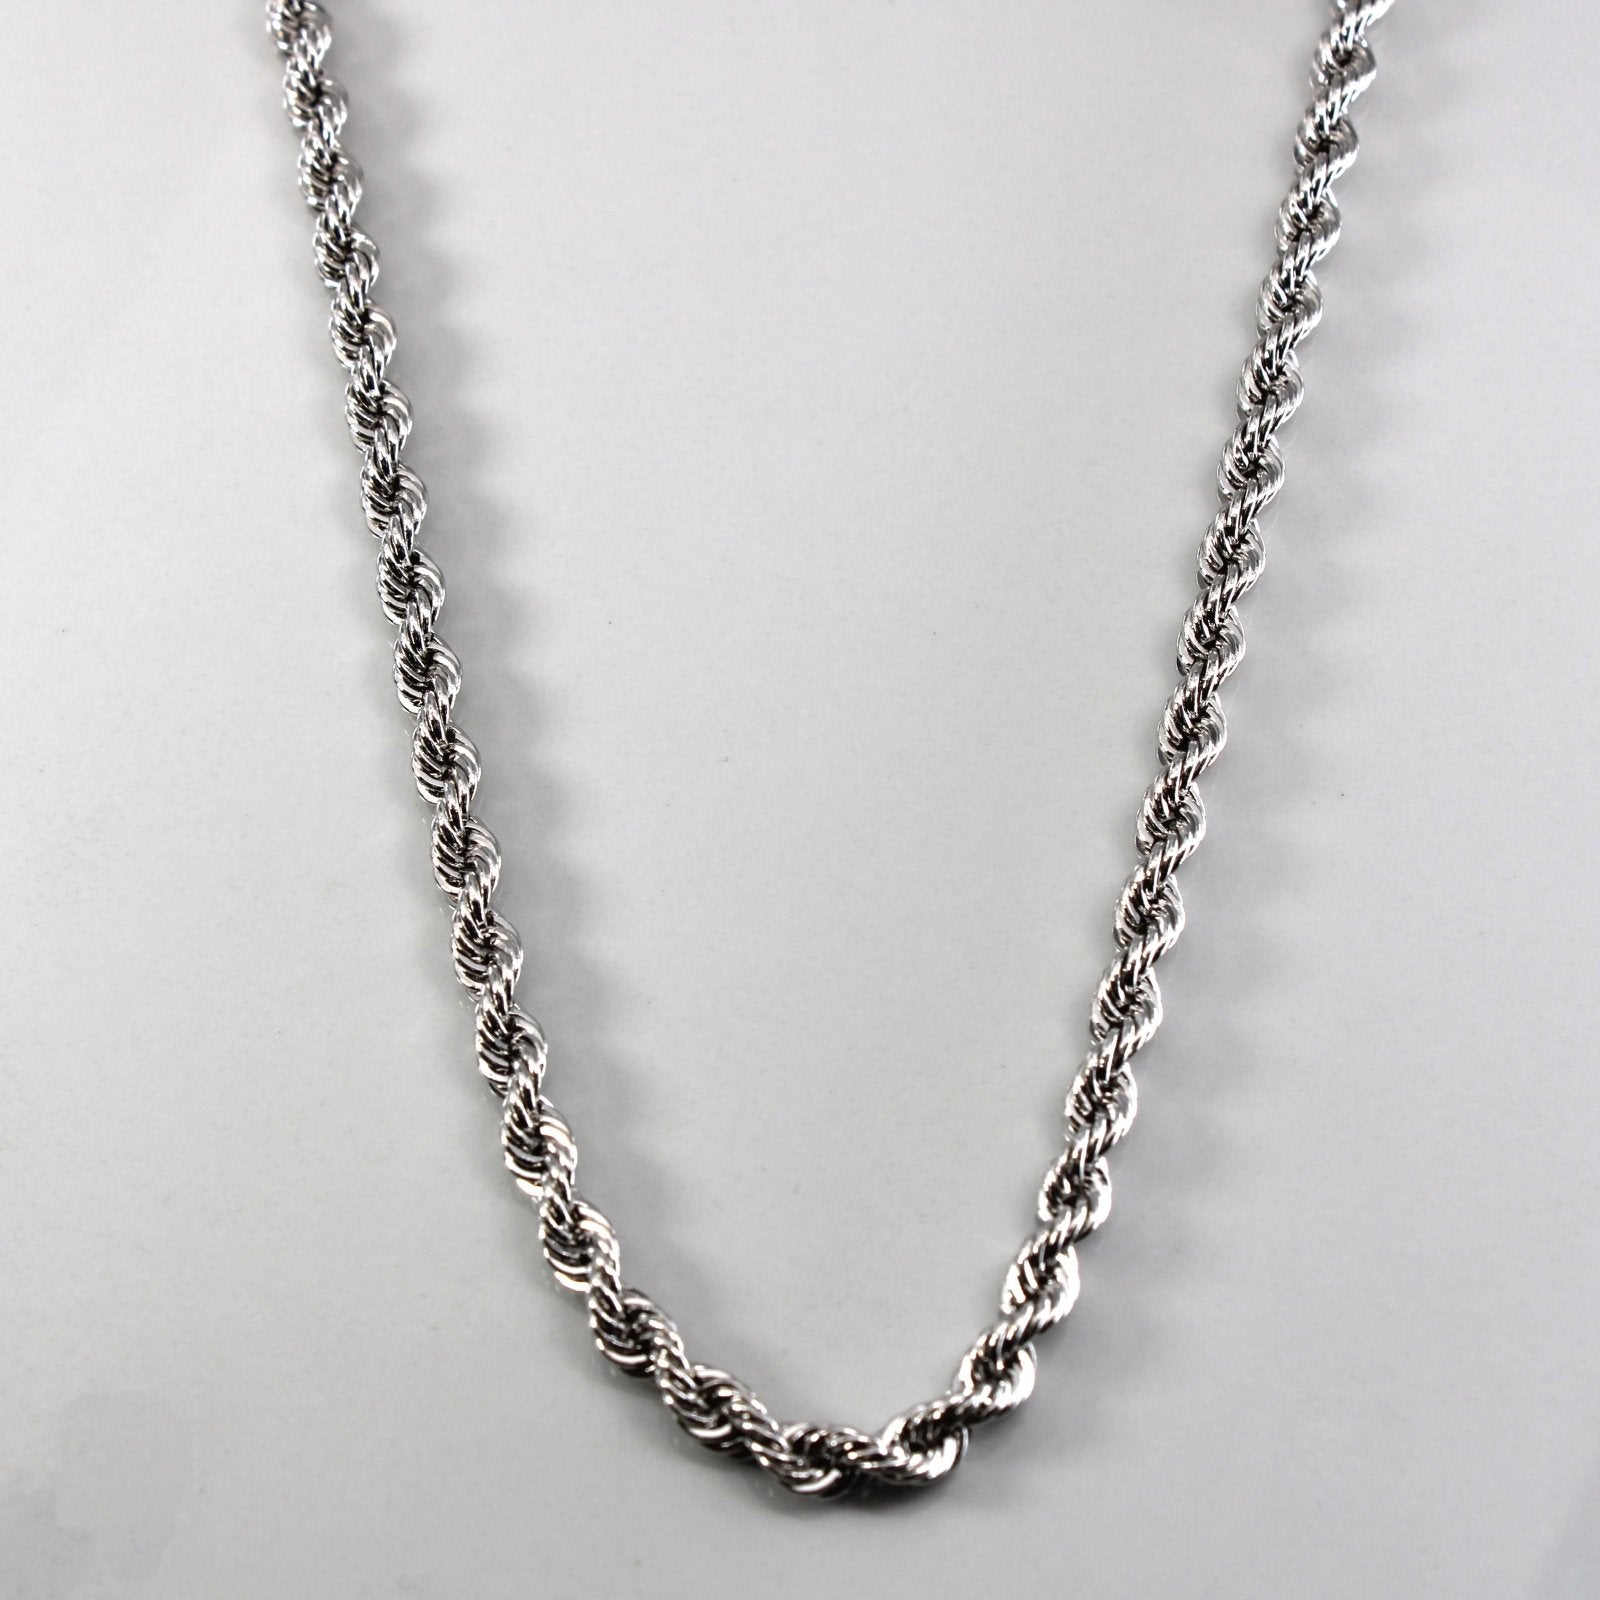 10k White Gold Rope Chain Necklace | 24